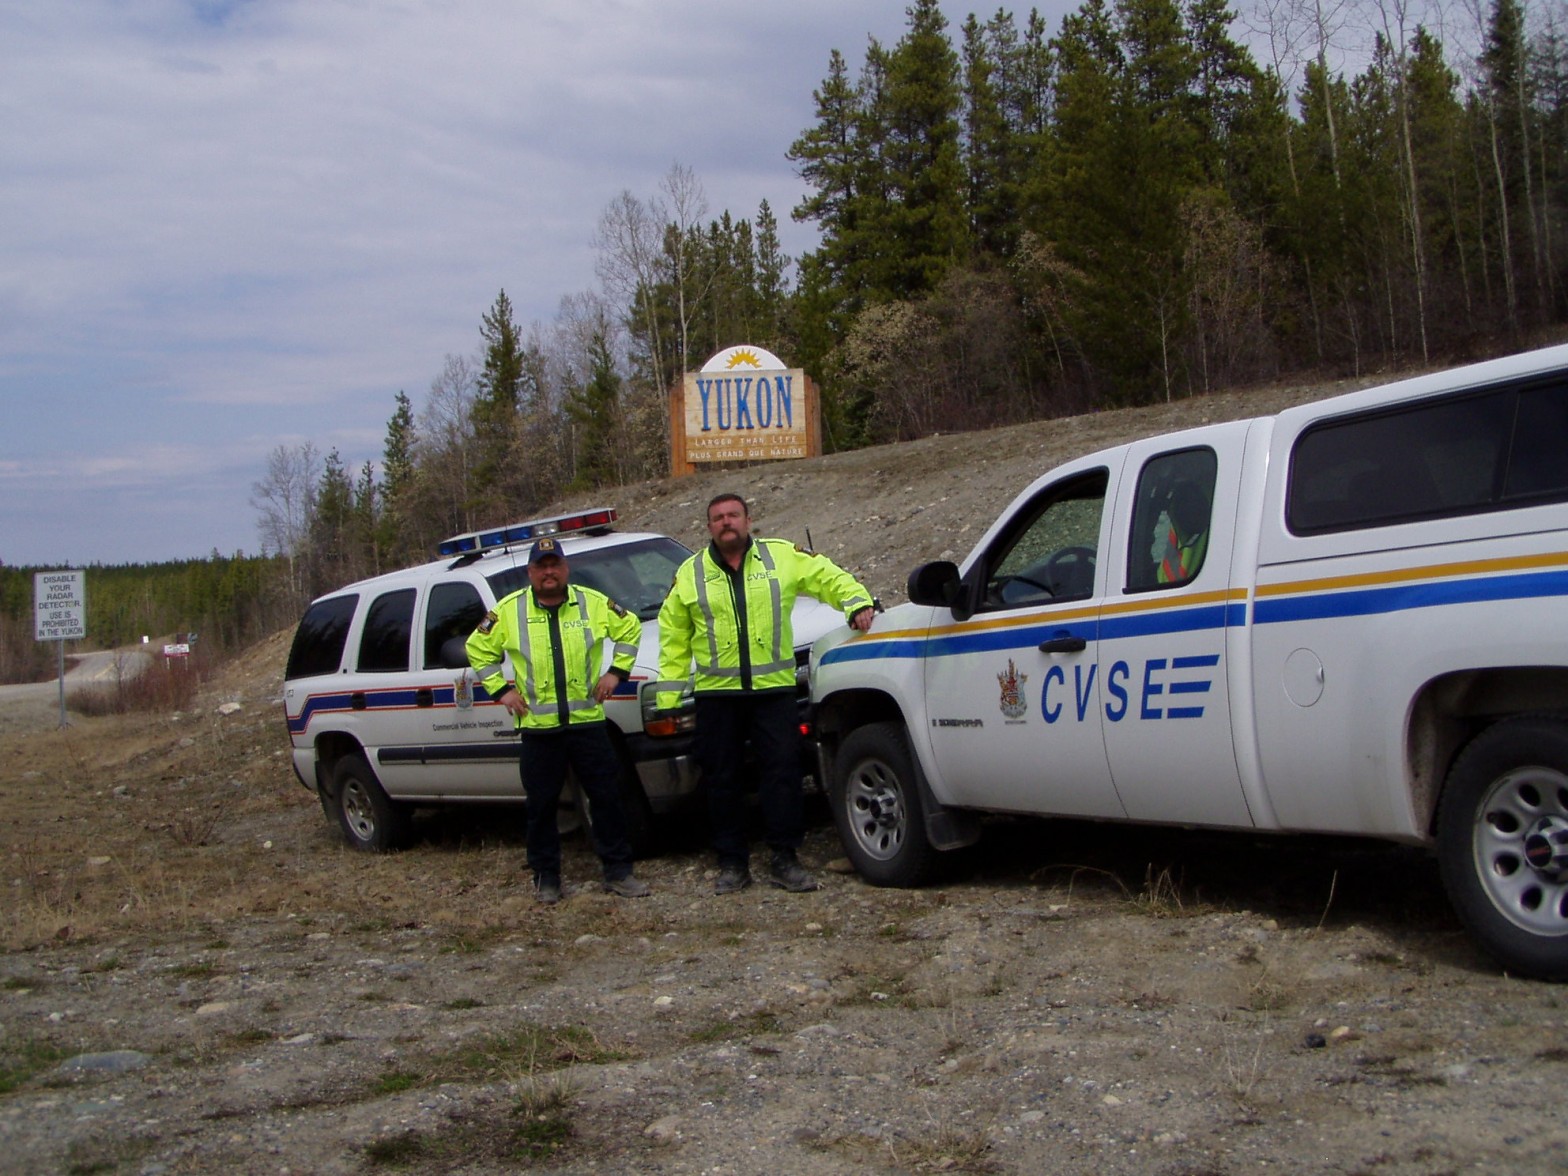 Skeena District Commercial Vehicle and Safety Enforcement (CVSE) officers participated in a multiagency commercial vehicle safety check in the Yukon, just over the BC border. They stand in reflective gear in front of two official trucks parked in front of the Yukon Territory border sign.